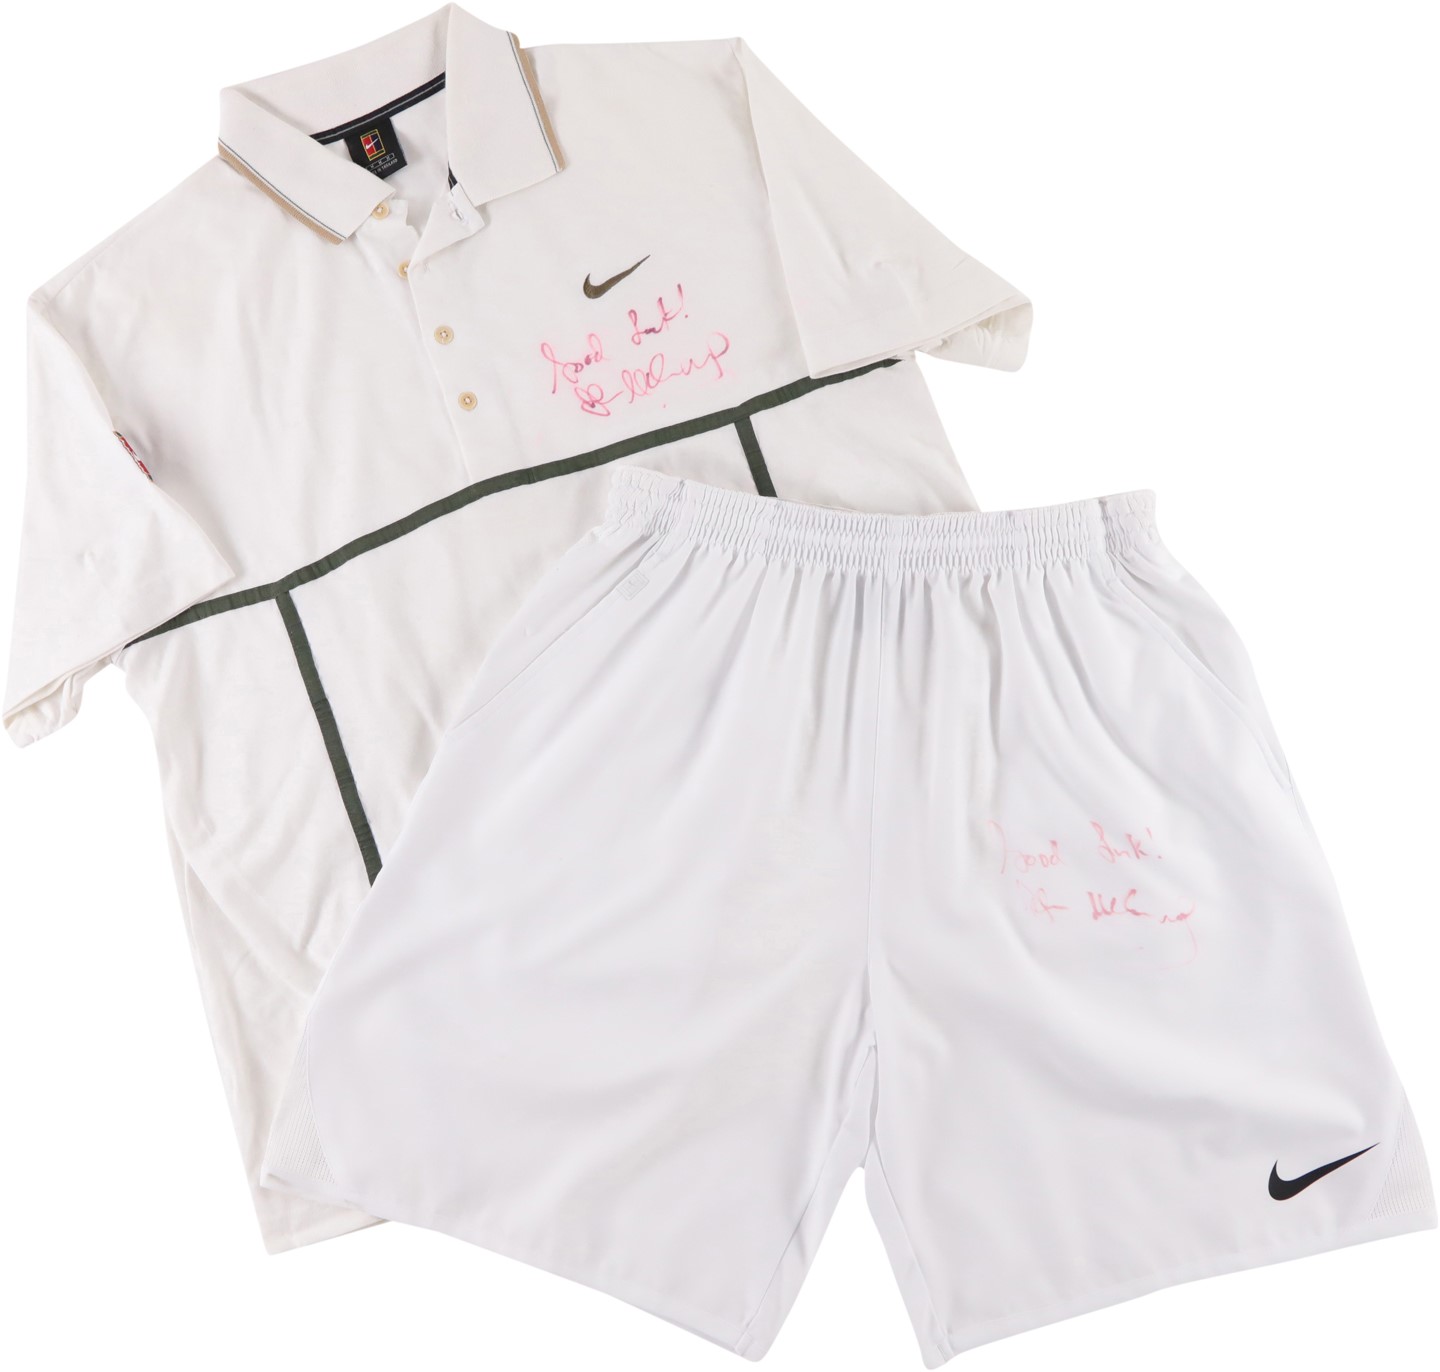 - John McEnroe Signed Match Worn Shirt & Shorts Attributed to 2006 Champions Cup Naples Tournament (PSA)